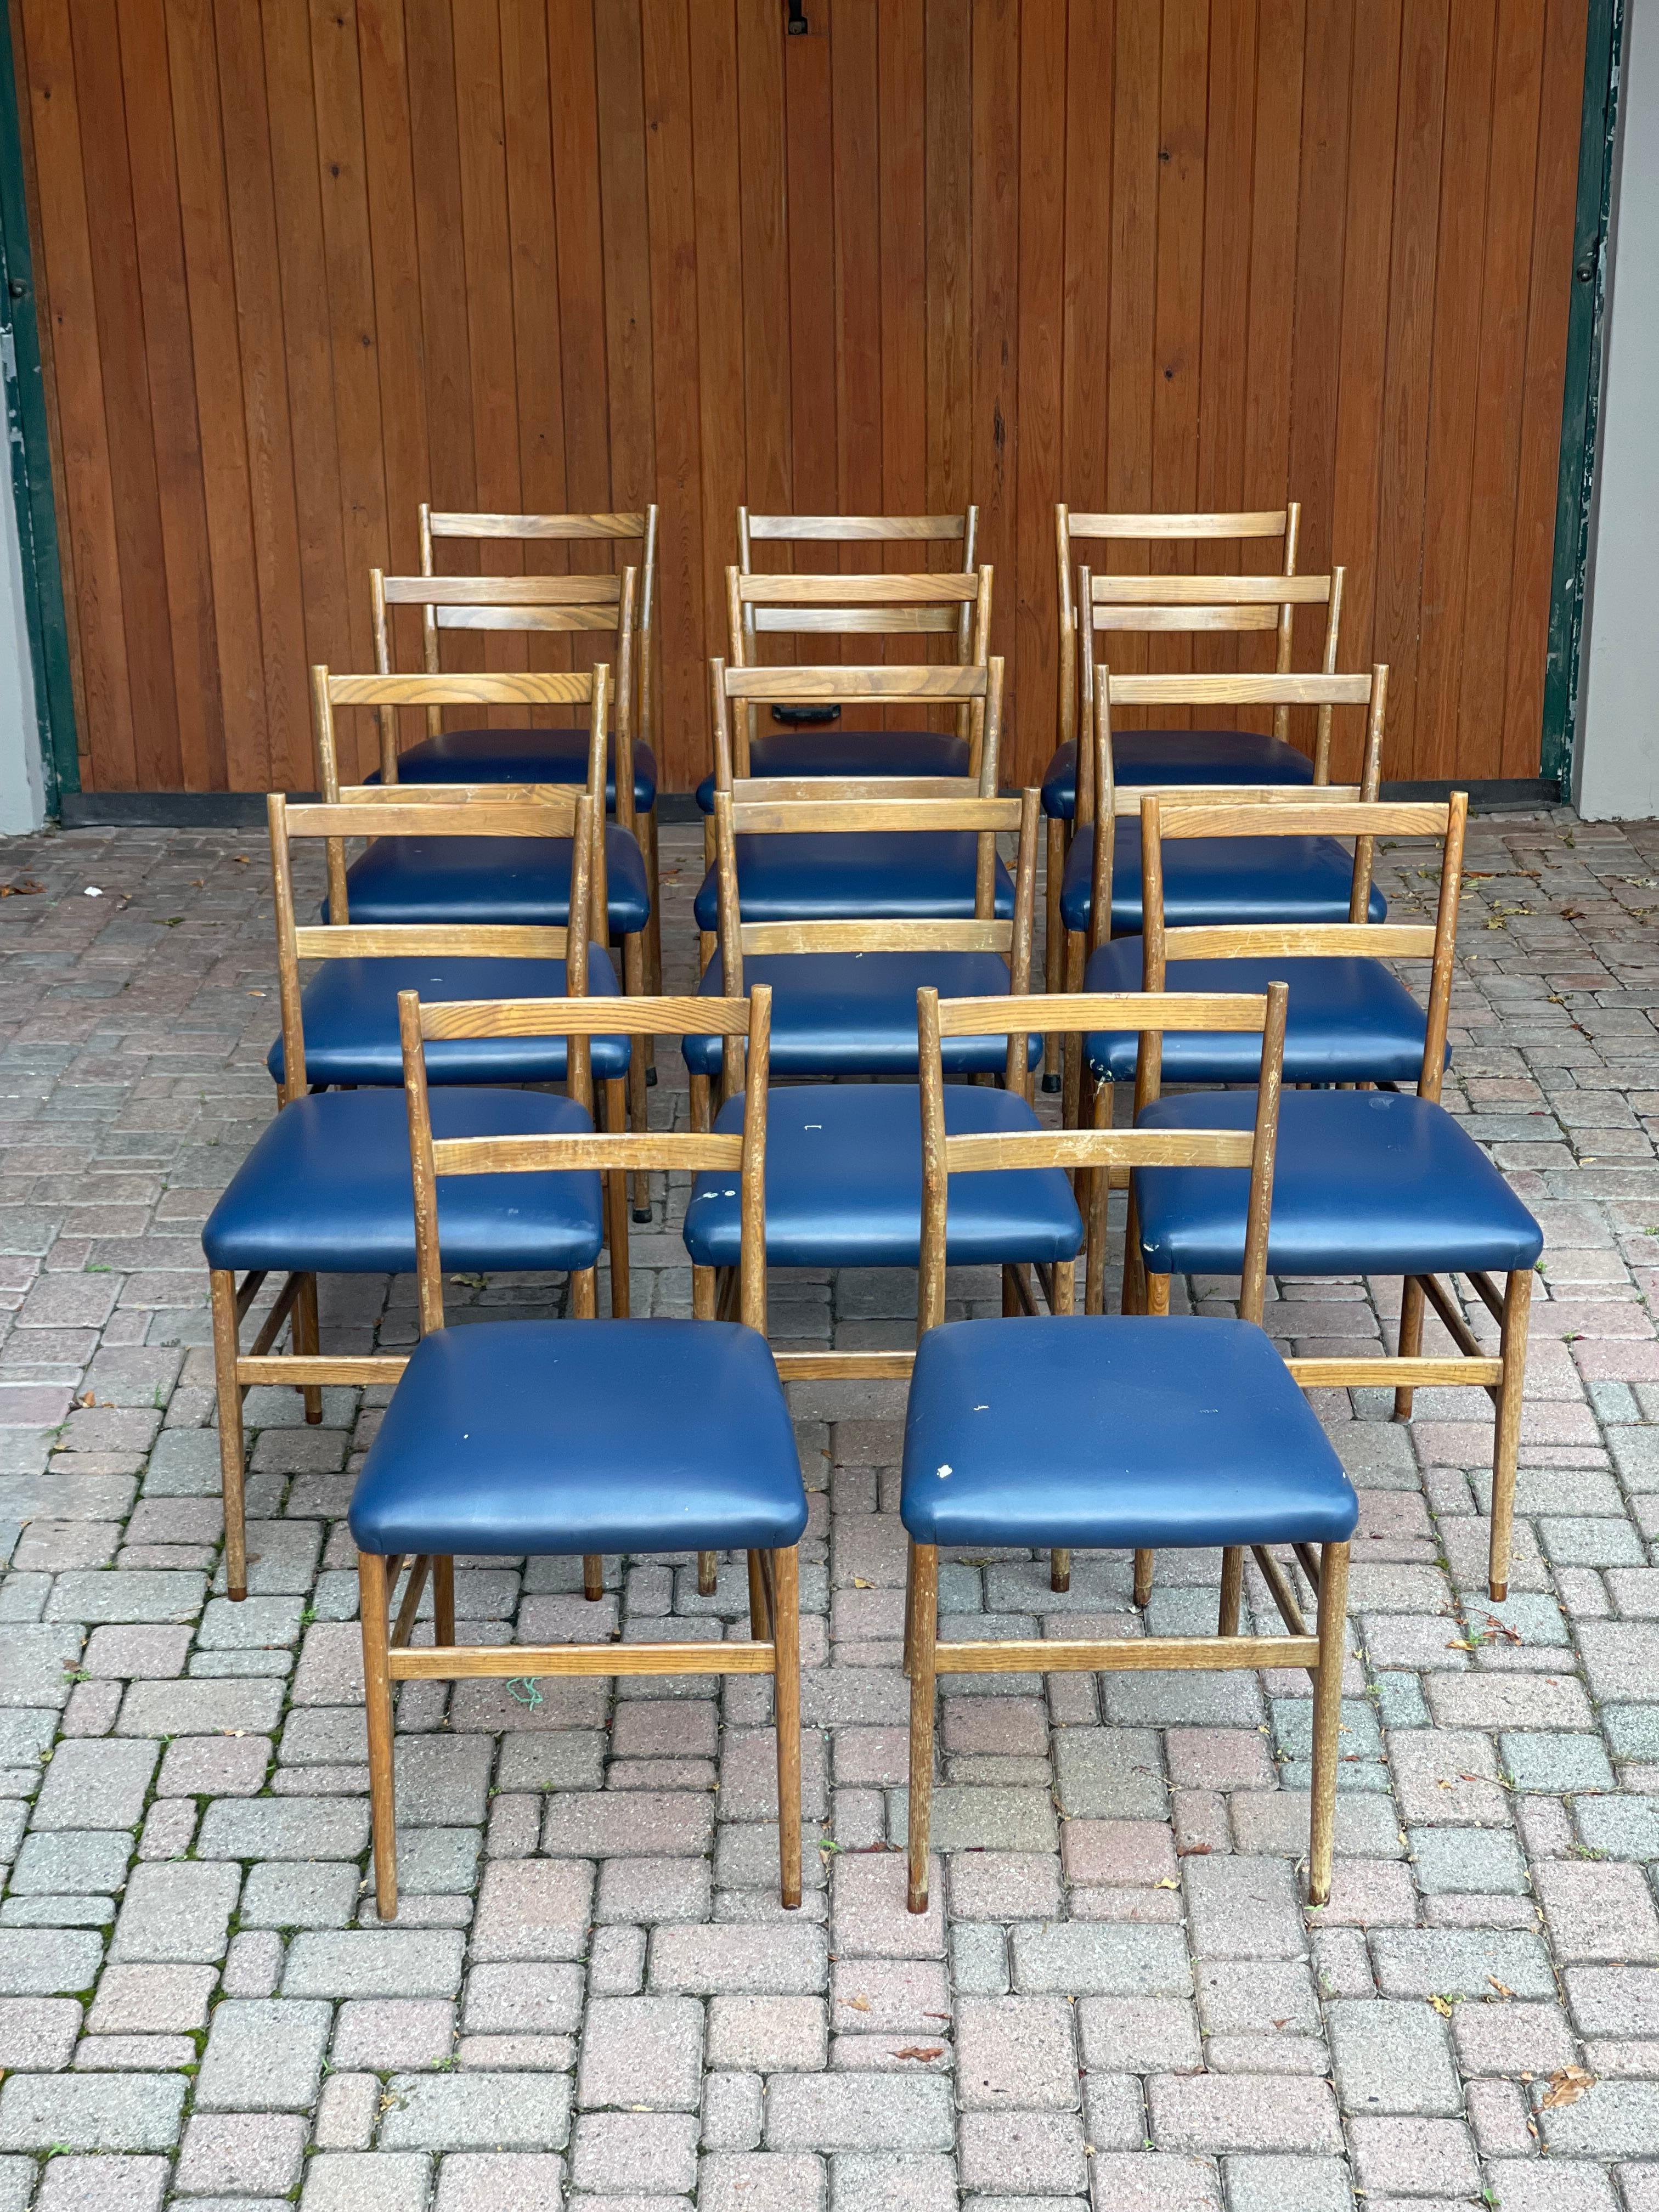 Vintage Chairs, Leggera by Gio Ponti , Mid Century Modern

Giò Ponti probably needs no introduction: he’s been arguably the most influential personality in Italian design and architecture for almost three decades, from the Fifties throughout the